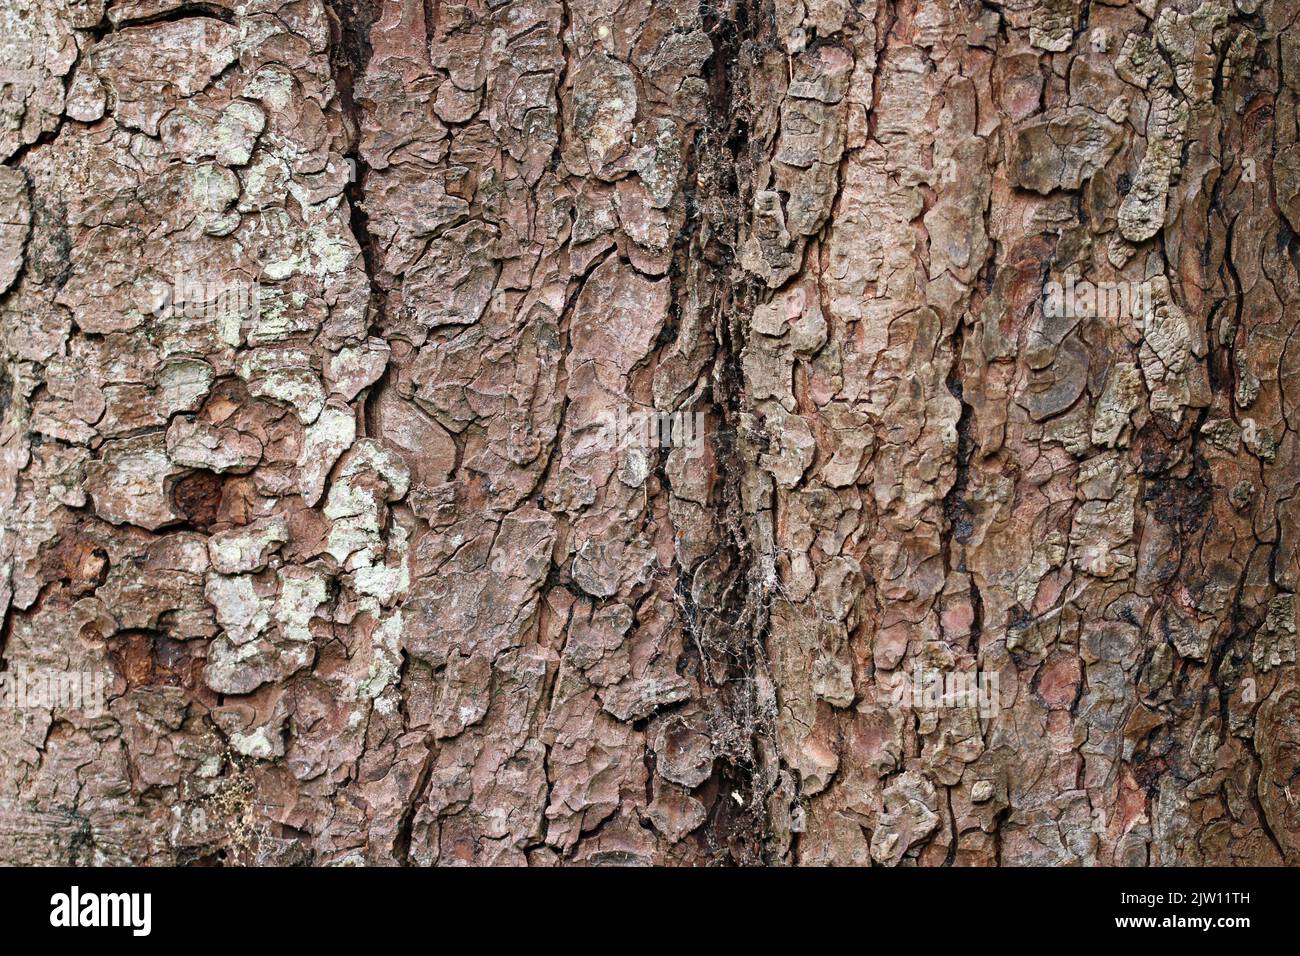 Horse chestnut, Aesculus hippocastanum, tree bark with crack in close up which could be used as a background or texture. Stock Photo